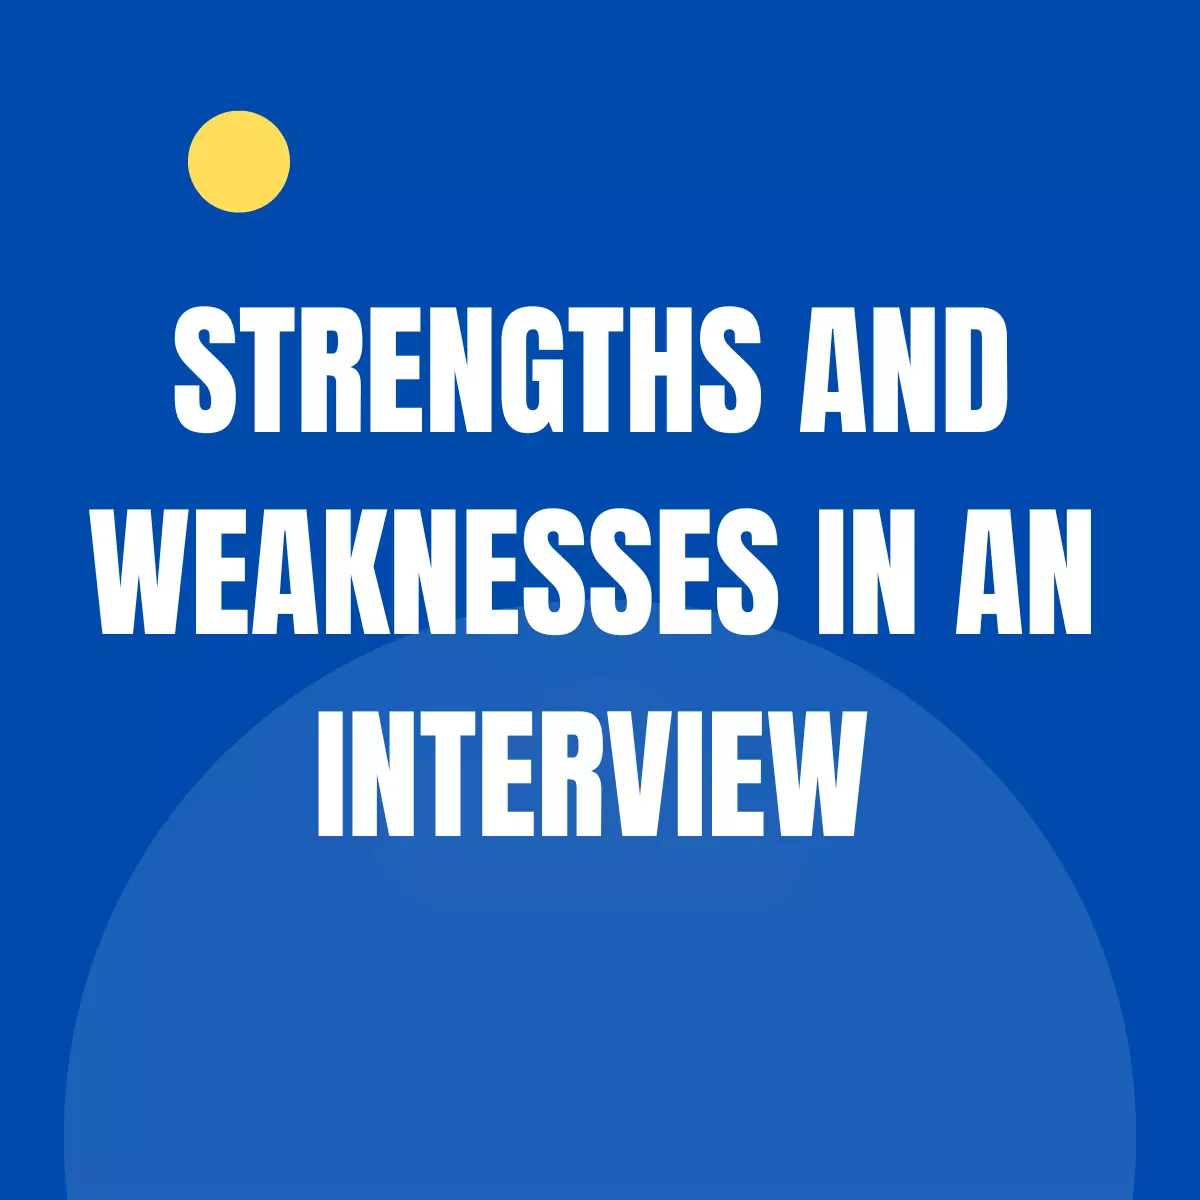 Strengths and Weaknesses in an Interview